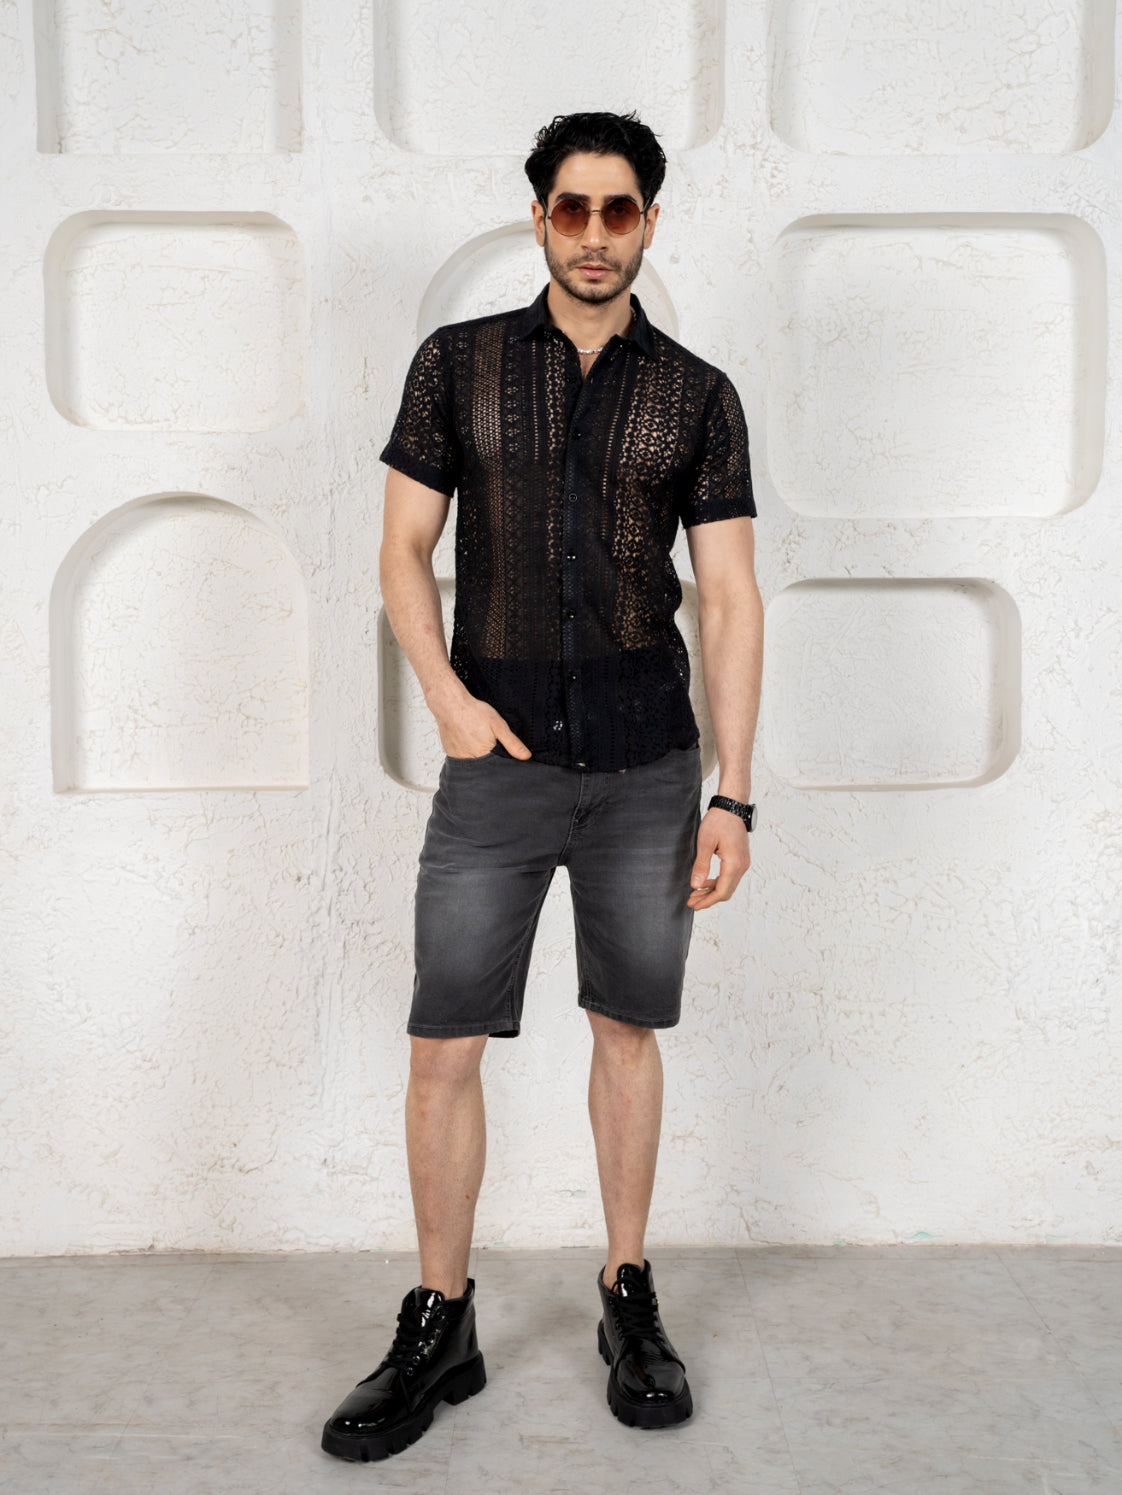 Firangi Yarn Crochet Cotton Jet Black Lace Shirt For Men 2024 - Half Sleeves(Take One Size Bigger Than Your Usual Size)